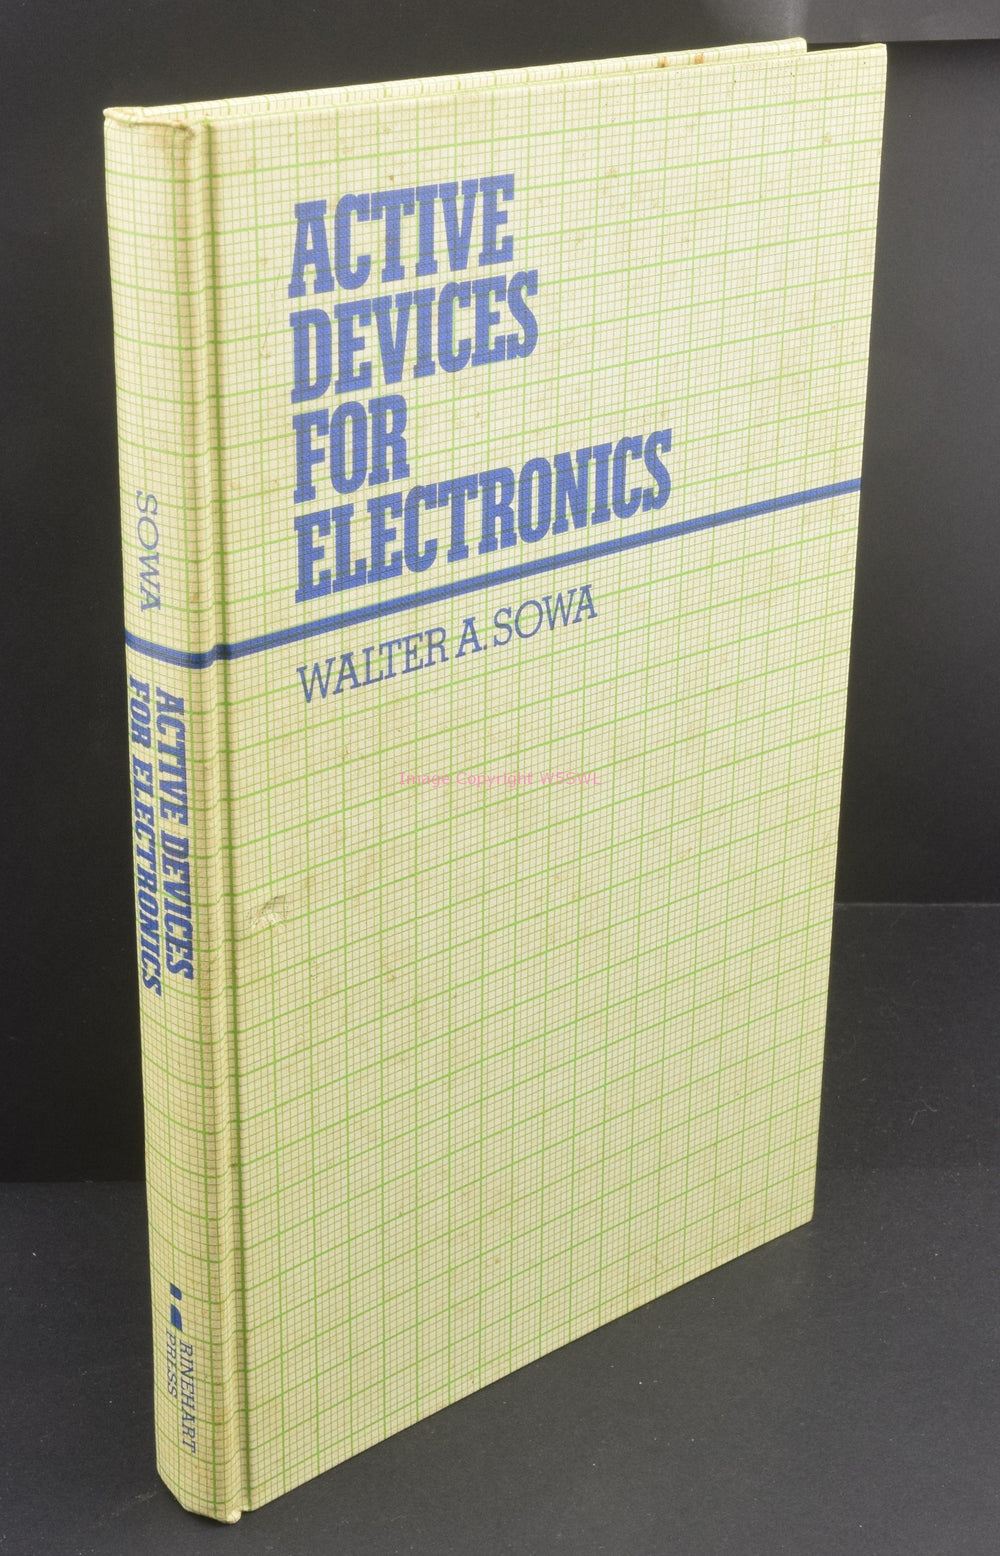 Active Devices For Electronics by Walter Sowa - Dave's Hobby Shop by W5SWL